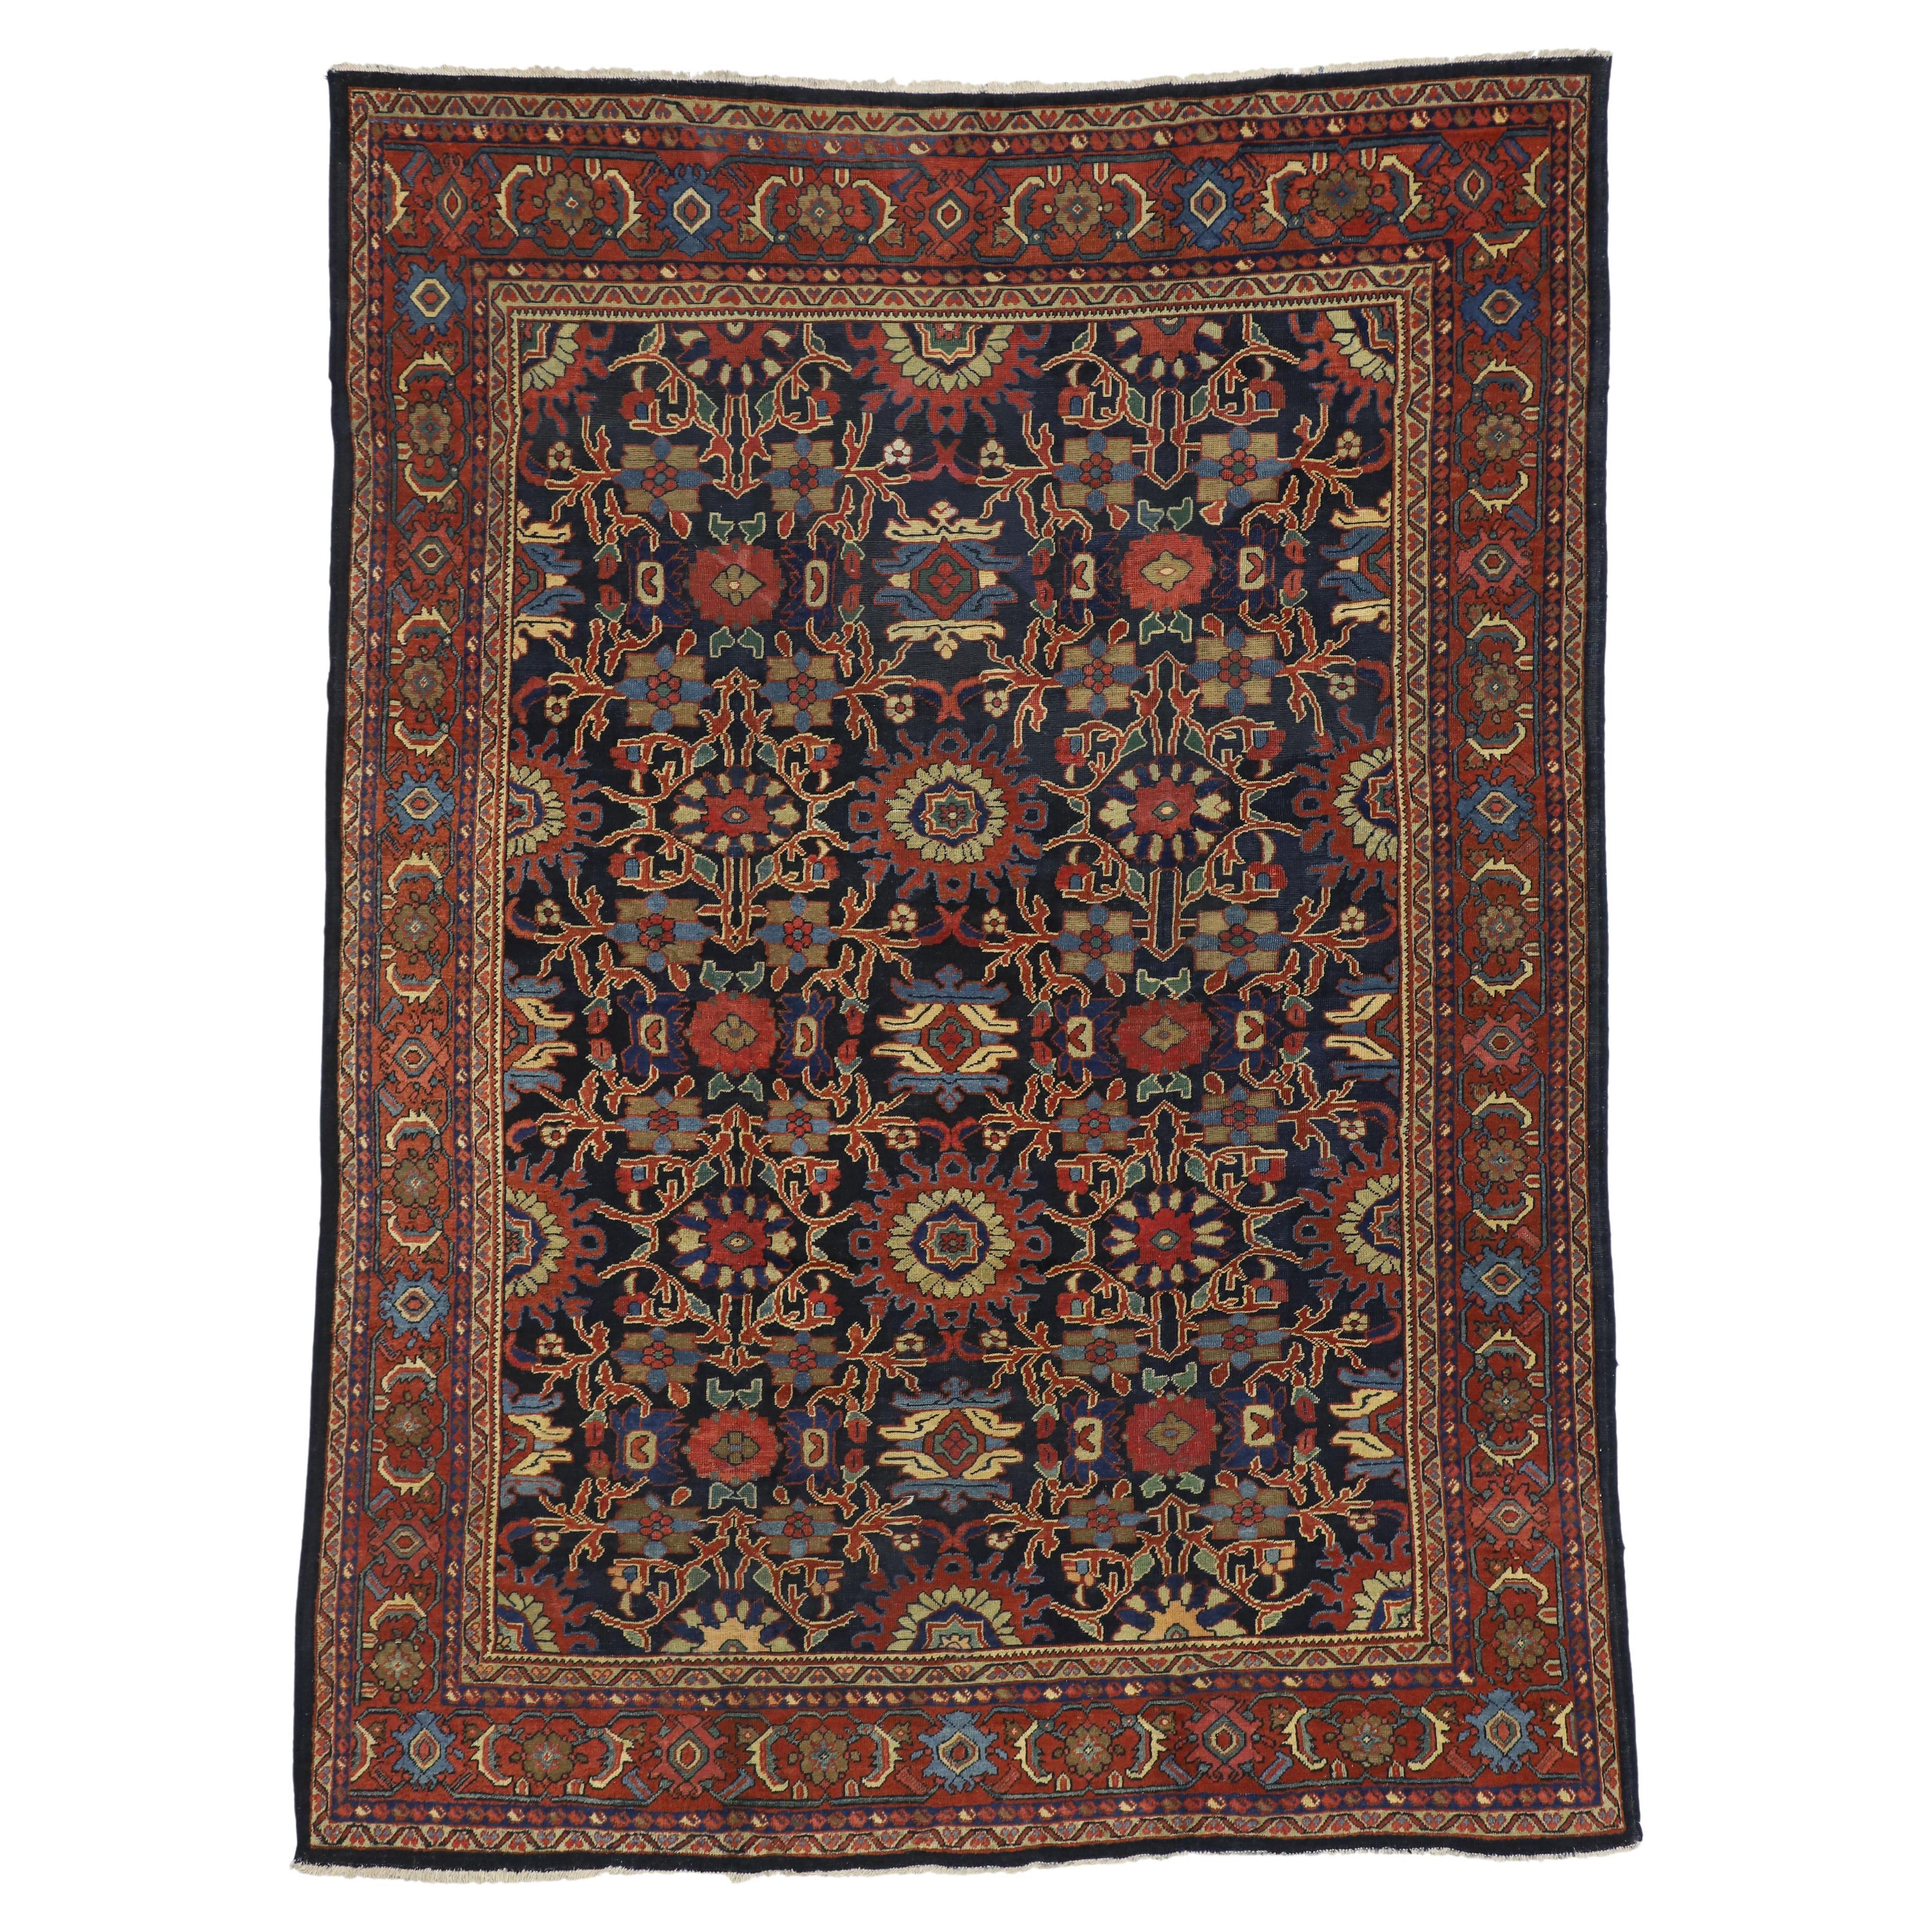 Distressed Antique Persian Mahal Rug with Rustic English Traditional Style 